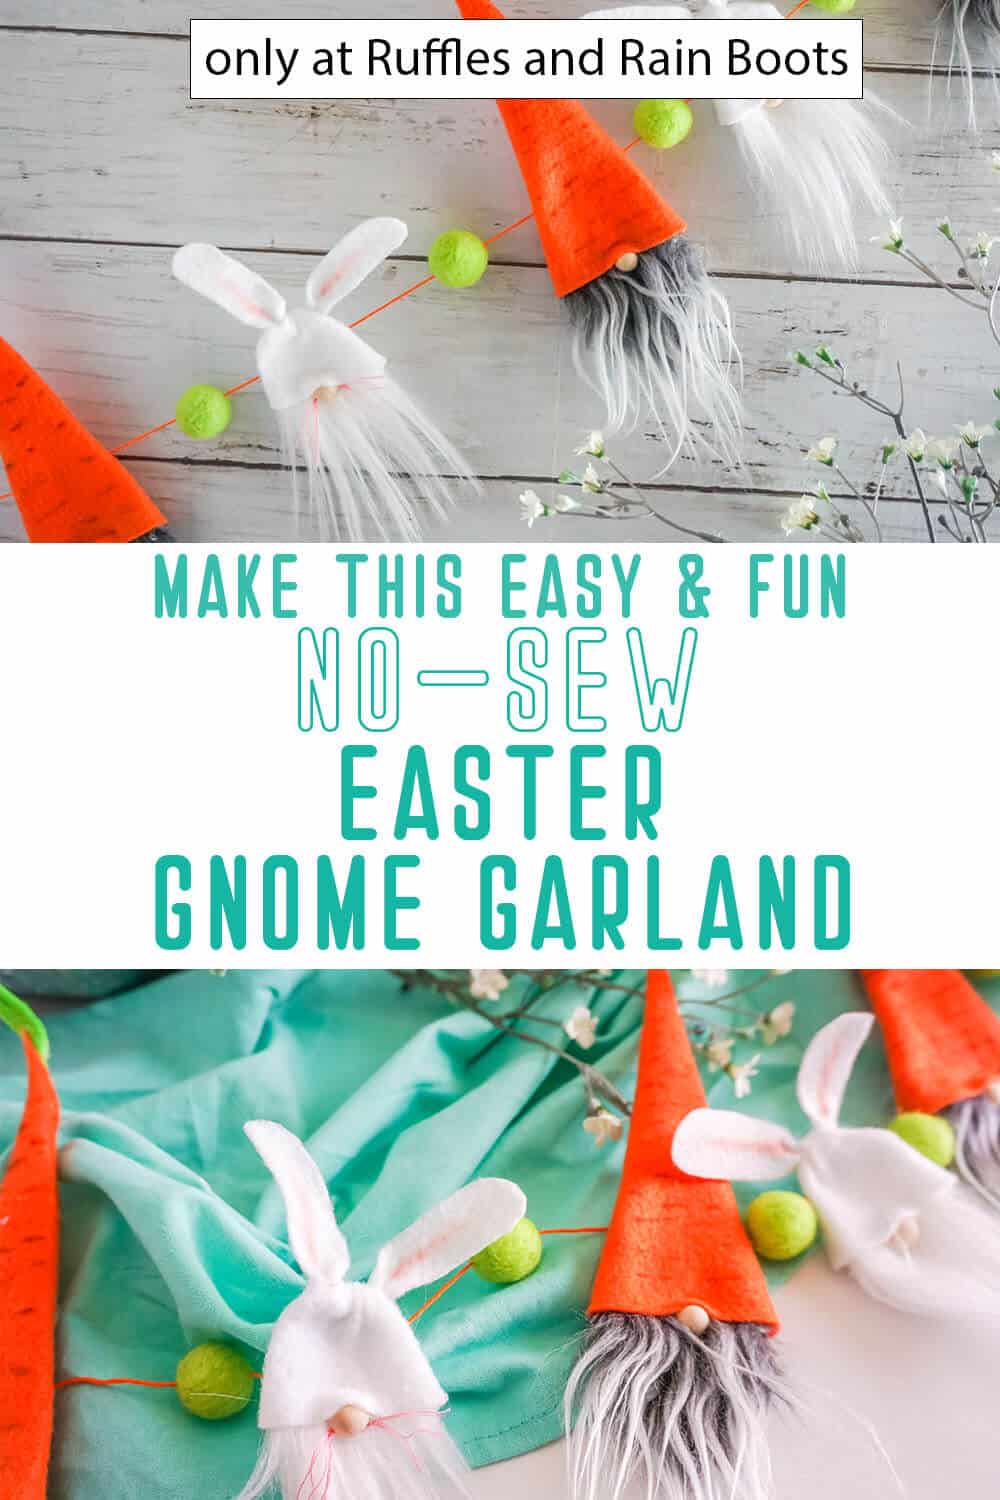 Vertical photo collage of a gnome garland for Easter gnome with text which reads make this easy & fun n sew easter gnome garland.